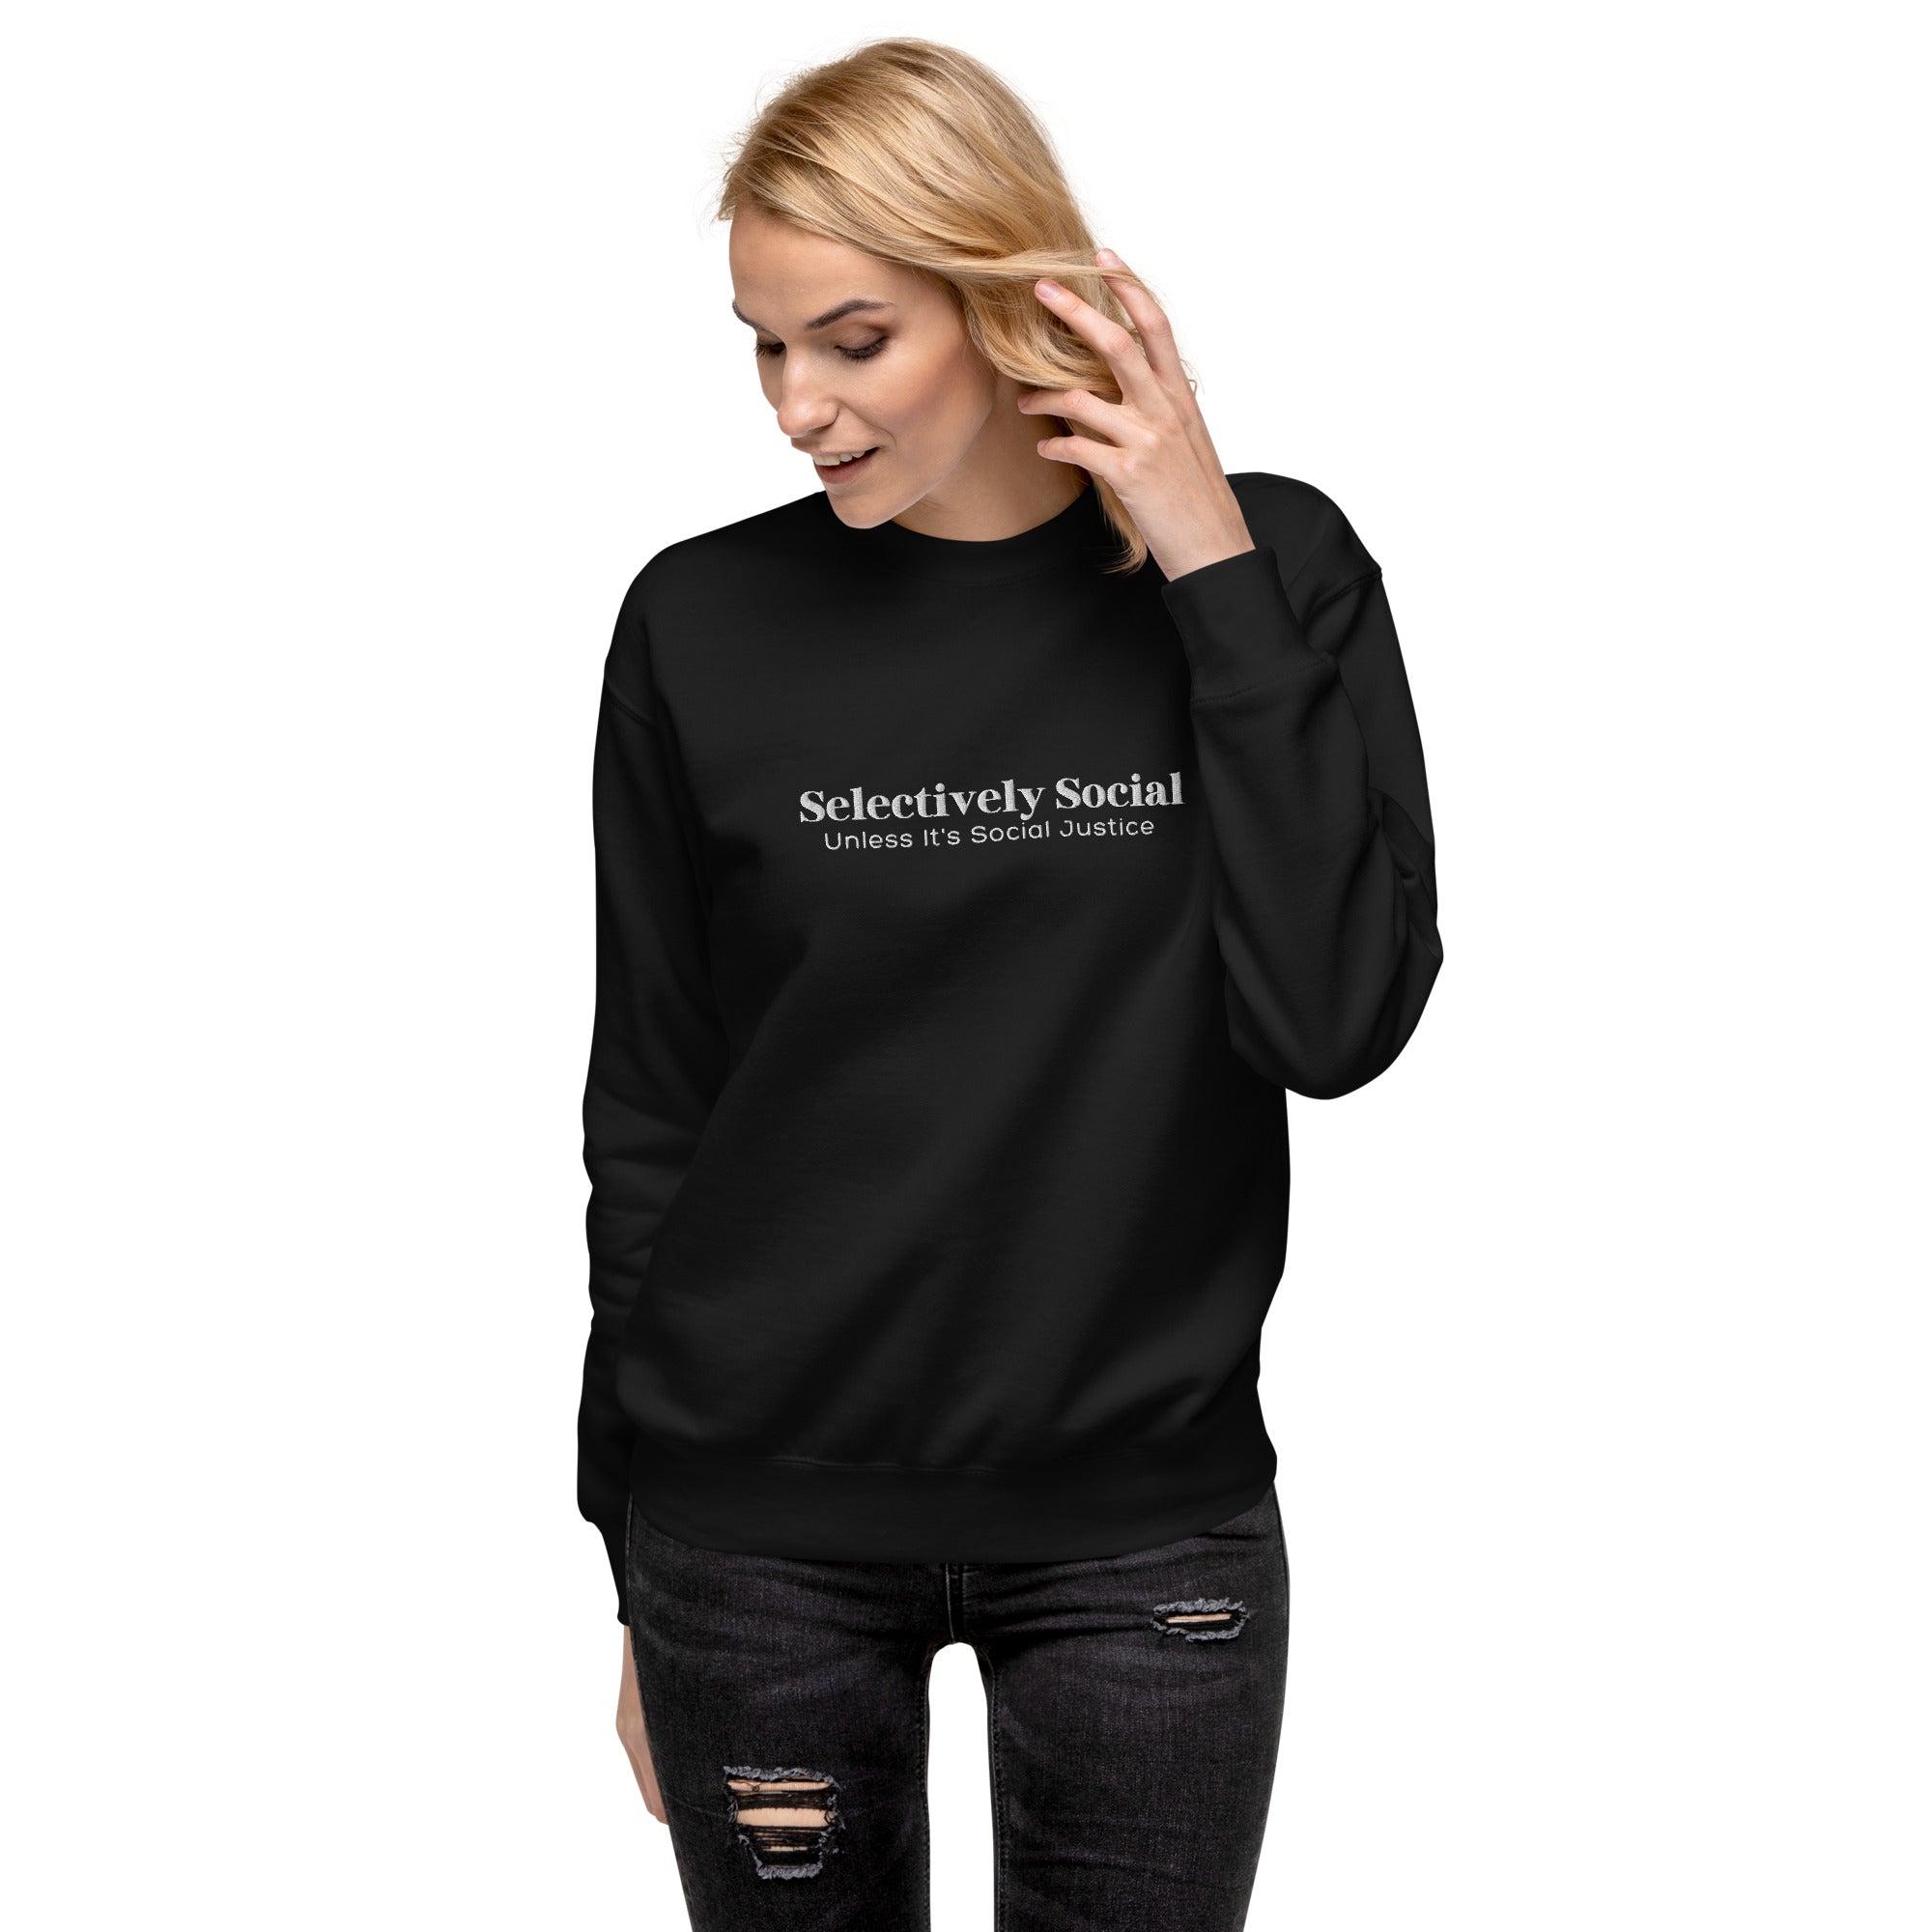 Selectively Social White Embroidery Unisex Premium Sweatshirt - The Kindness Cause